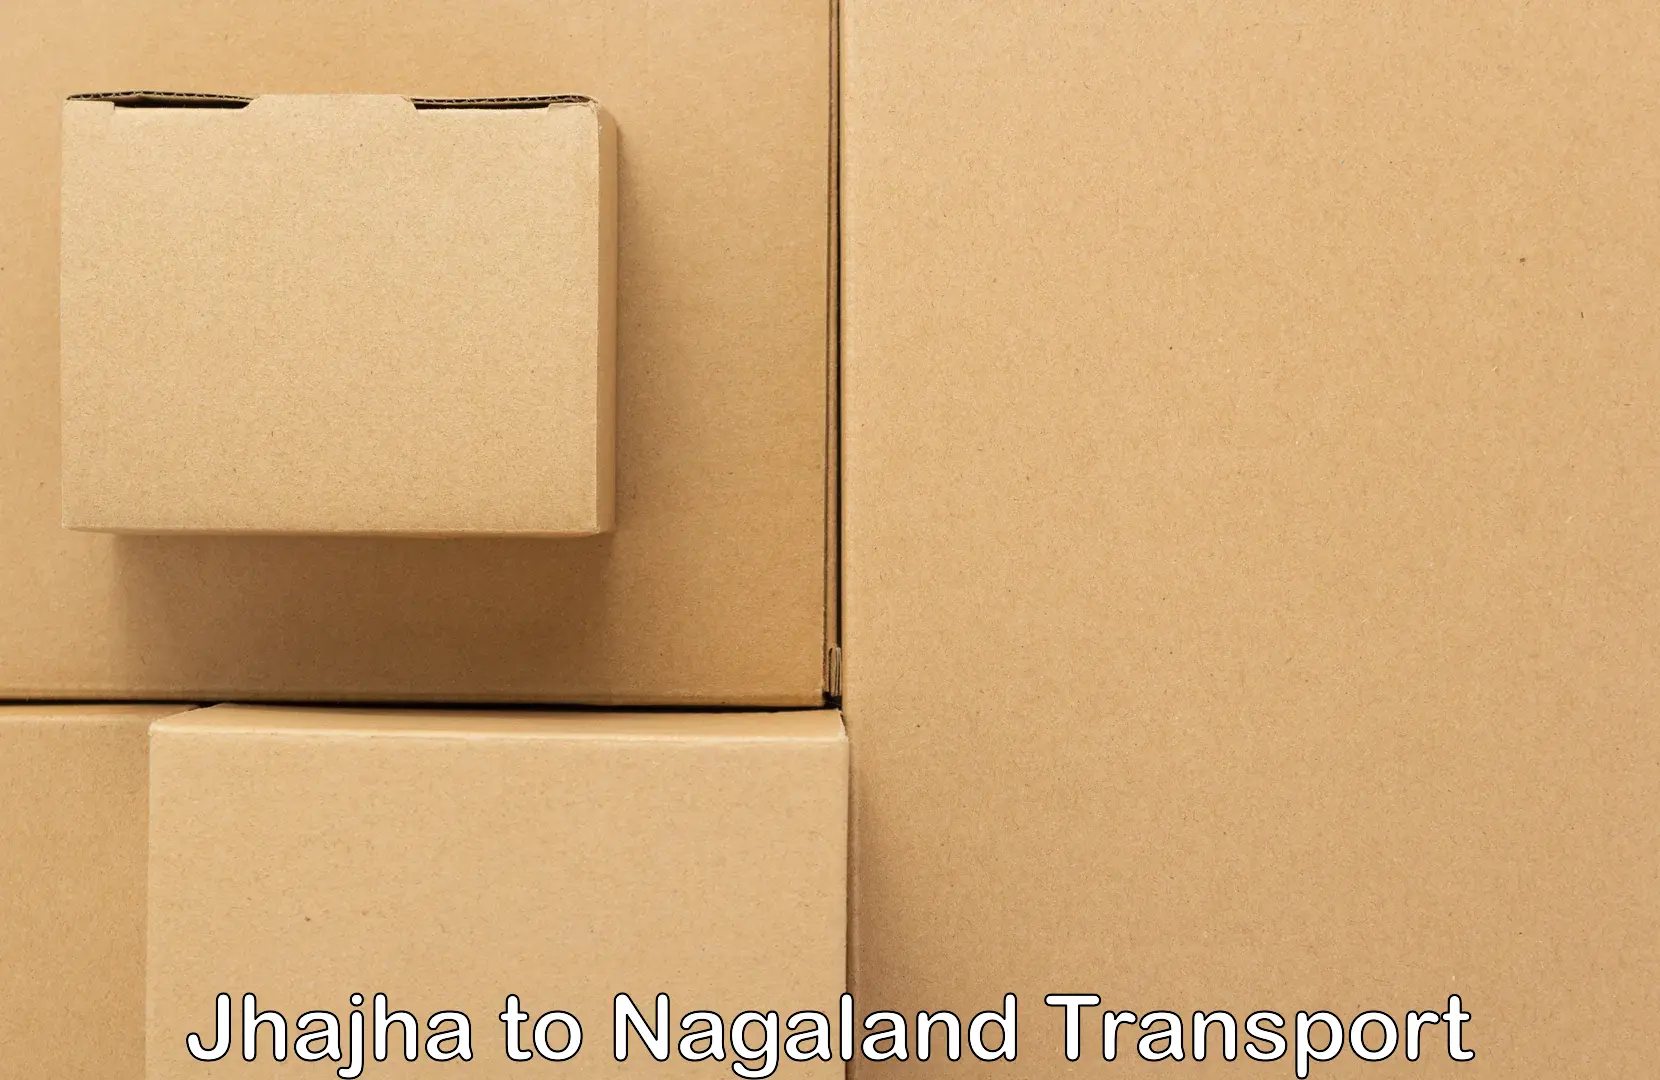 Land transport services in Jhajha to Dimapur